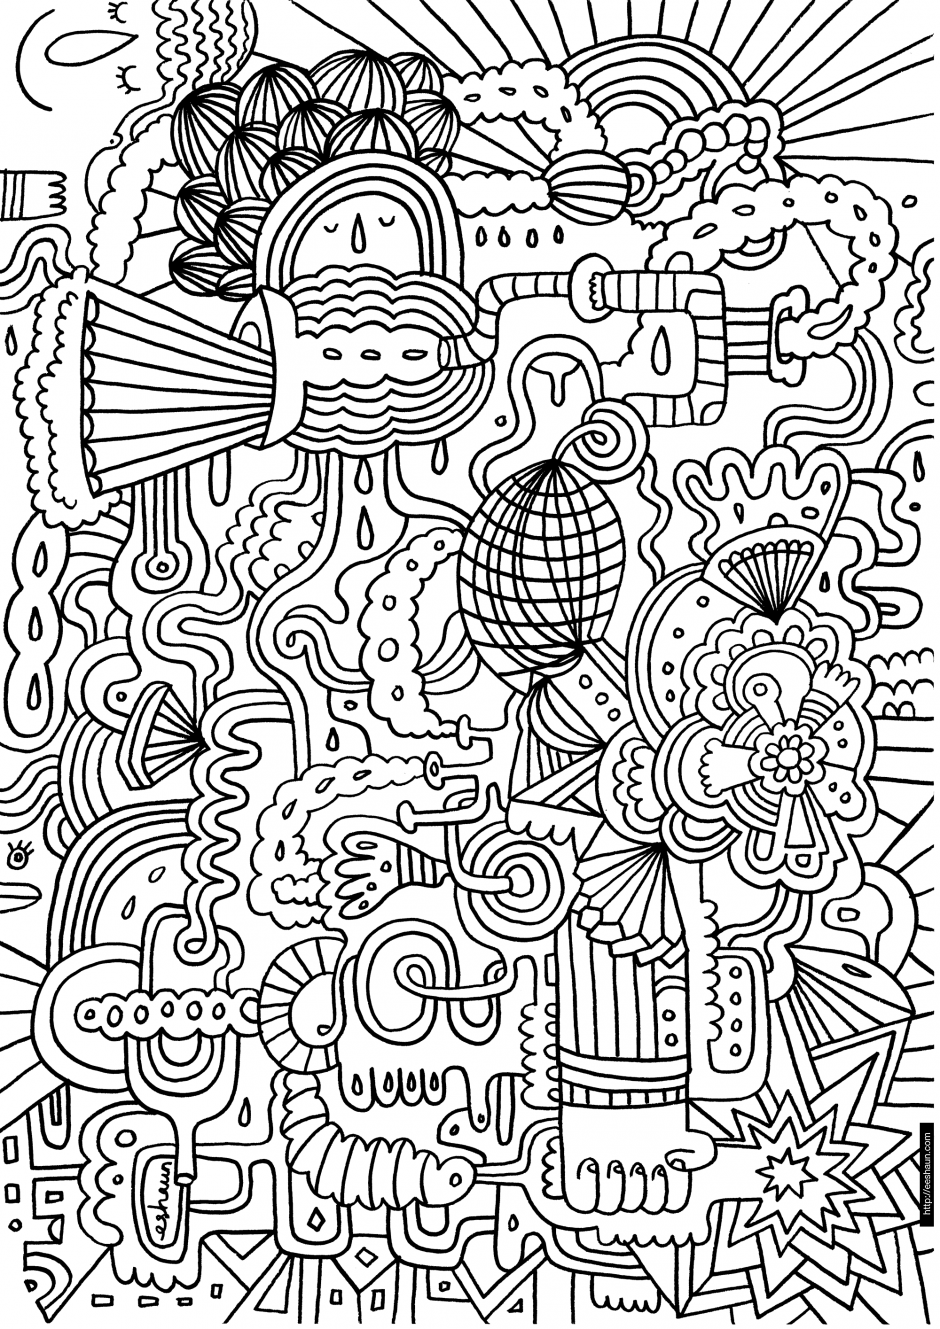 Abstract J Coloring Page - Coloring Pages For All Ages